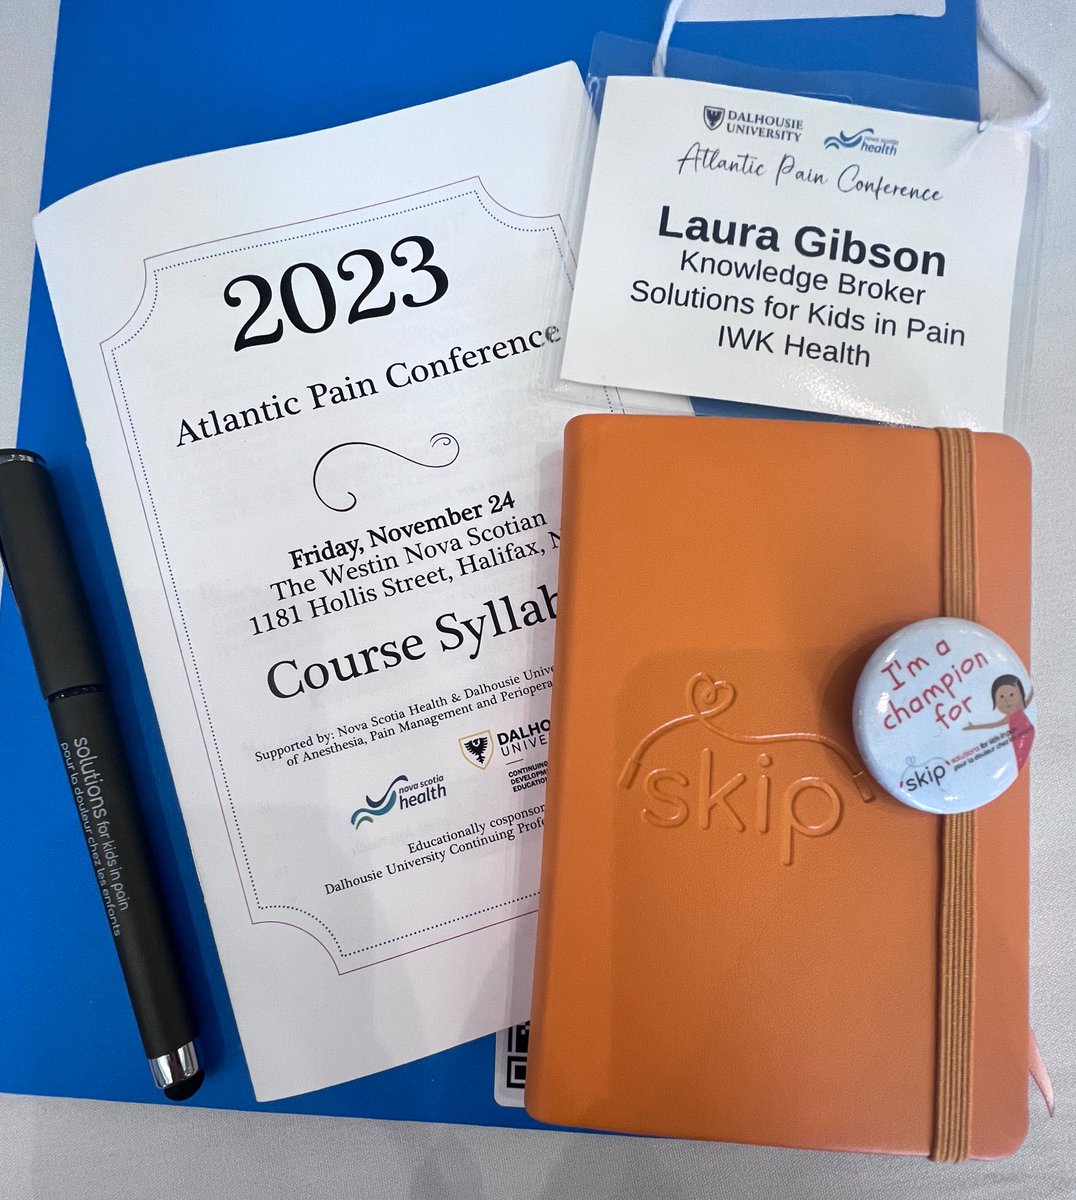 Grateful to learn about the work being done to improve pain management in Atlantic Canada 📖👩🏻‍🏫

#APC2023 #ItDoesntHavetoHurt